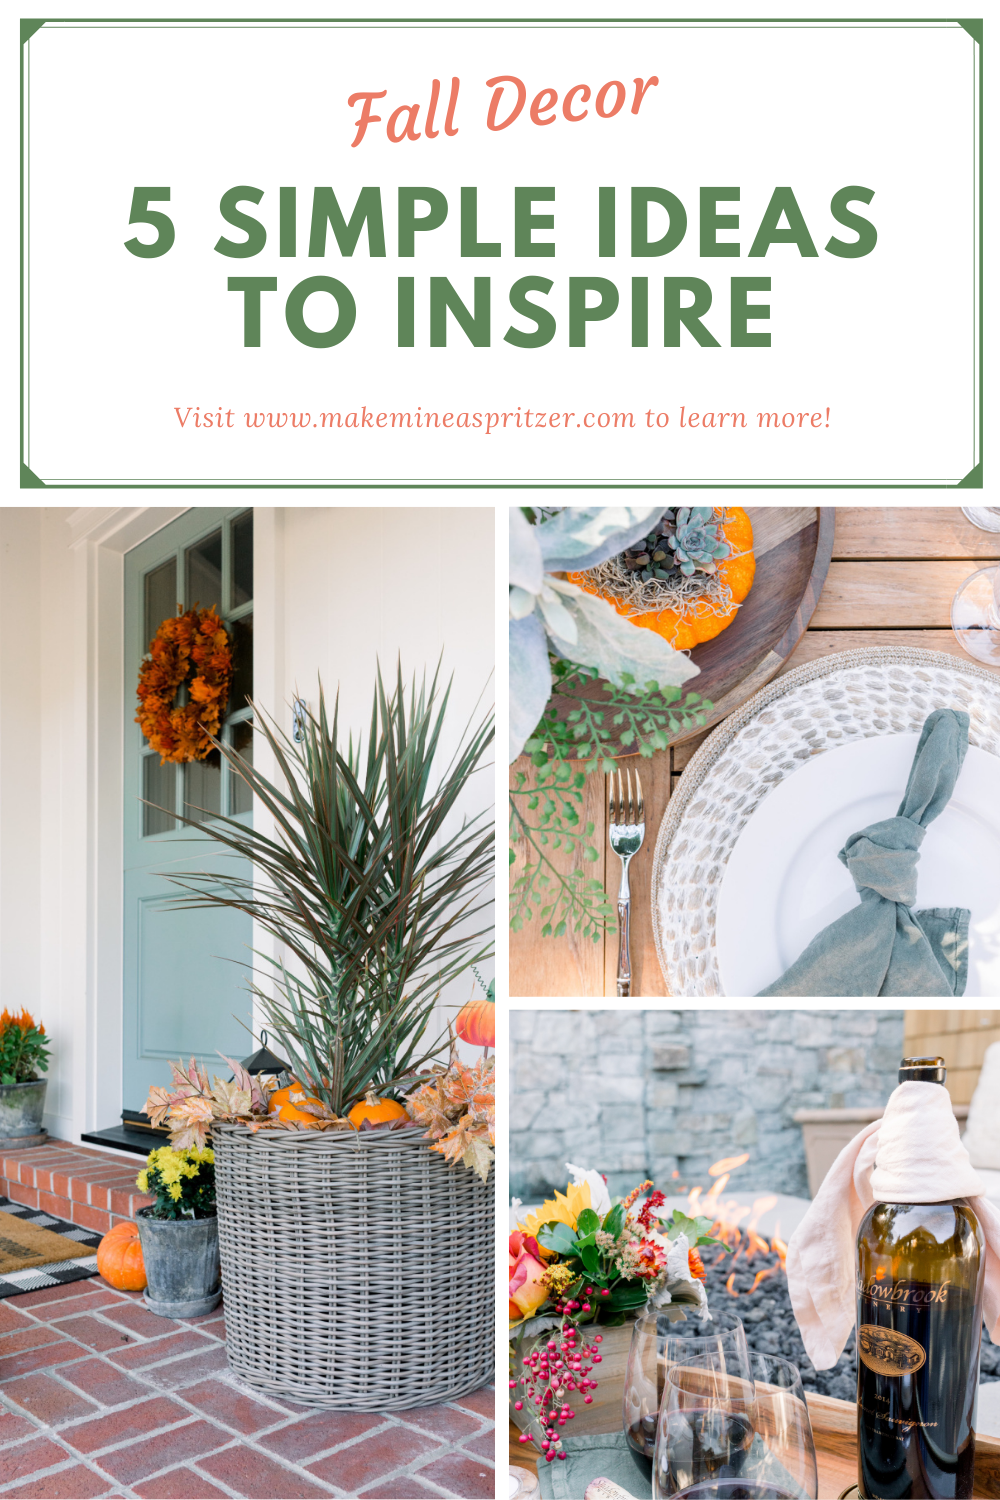 5 Simple Ideas to Inspire Your Fall Decor Pinterest Collage